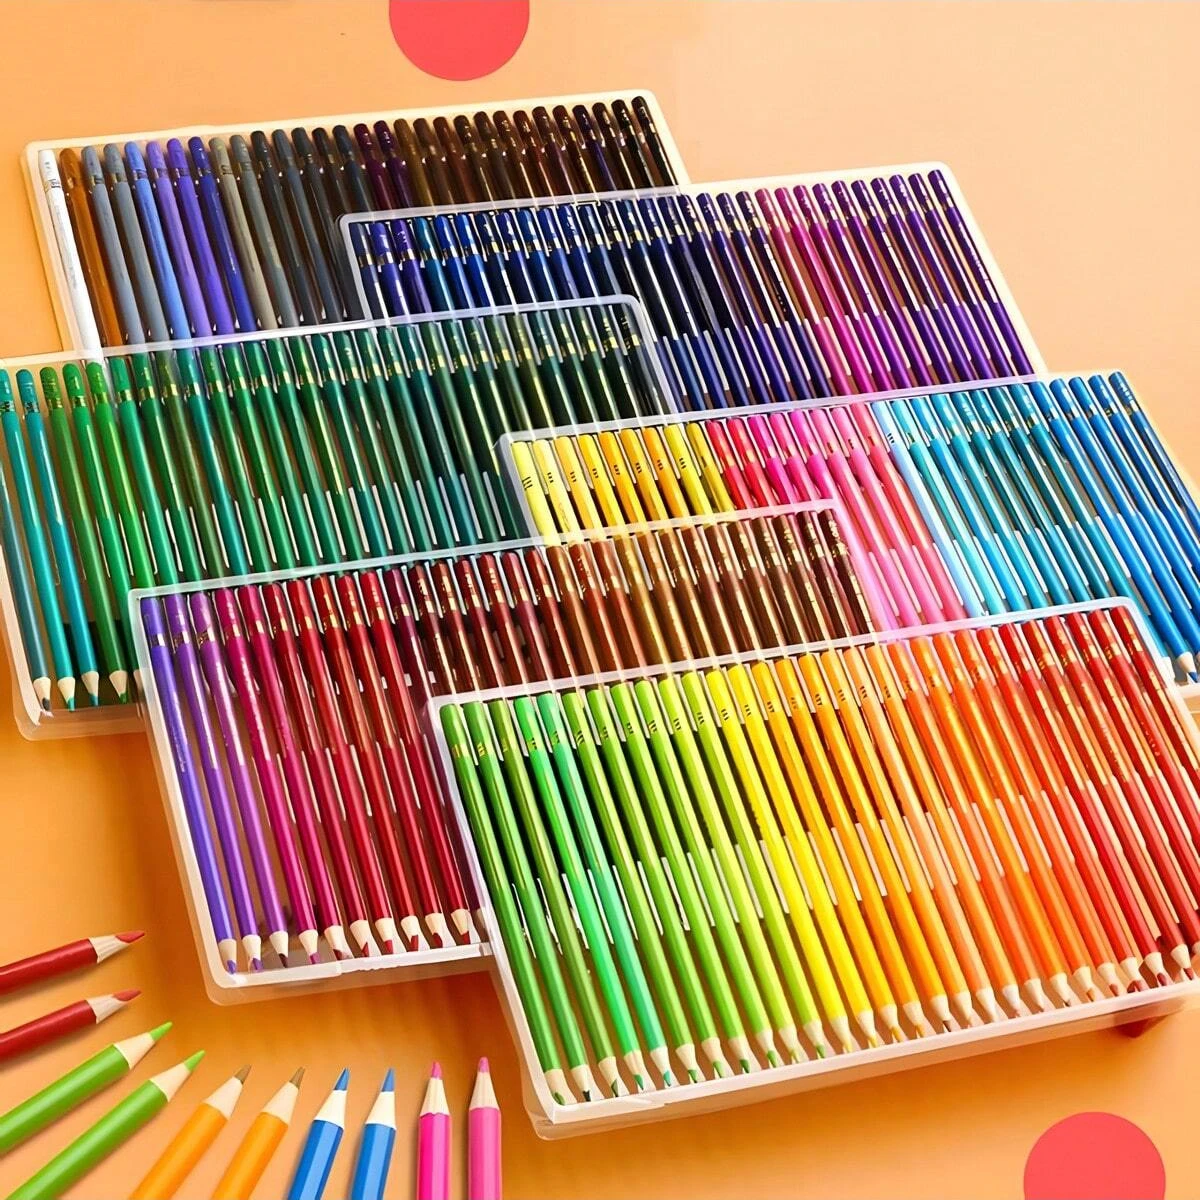 Buy Professional Color Pencils Online Shopping at